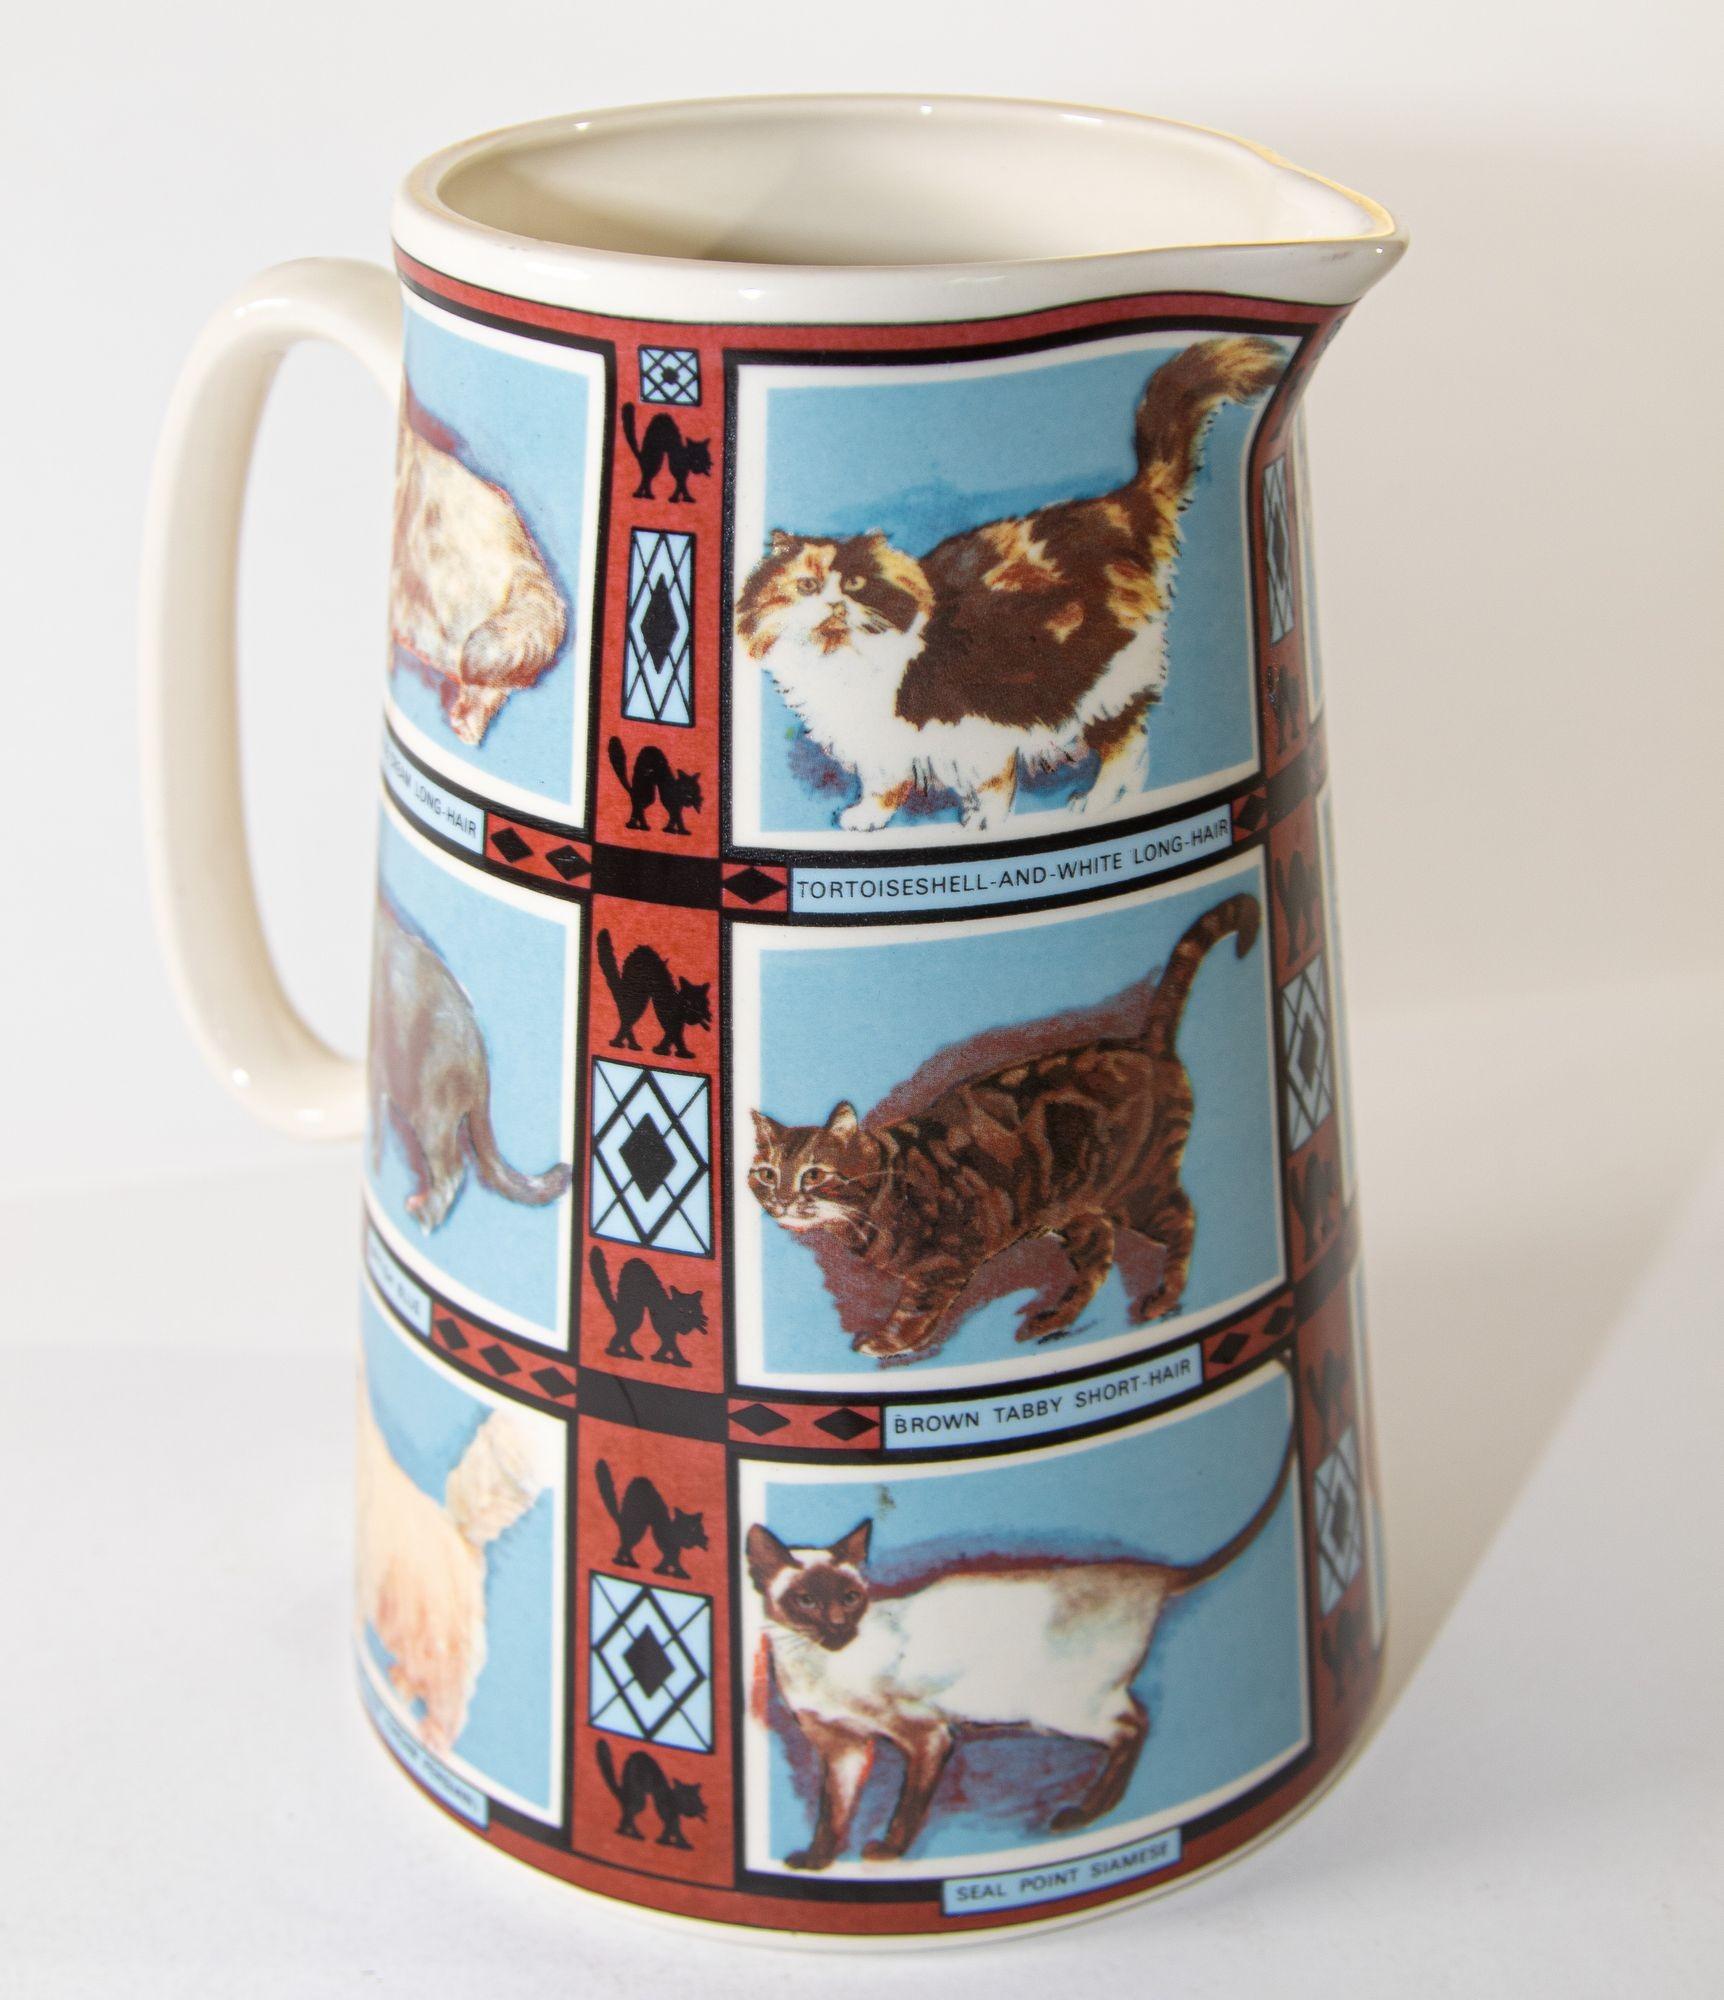 Vintage 1970s Ceramic Pitcher, Derbyshire England with Cat Breeds Pictures 4